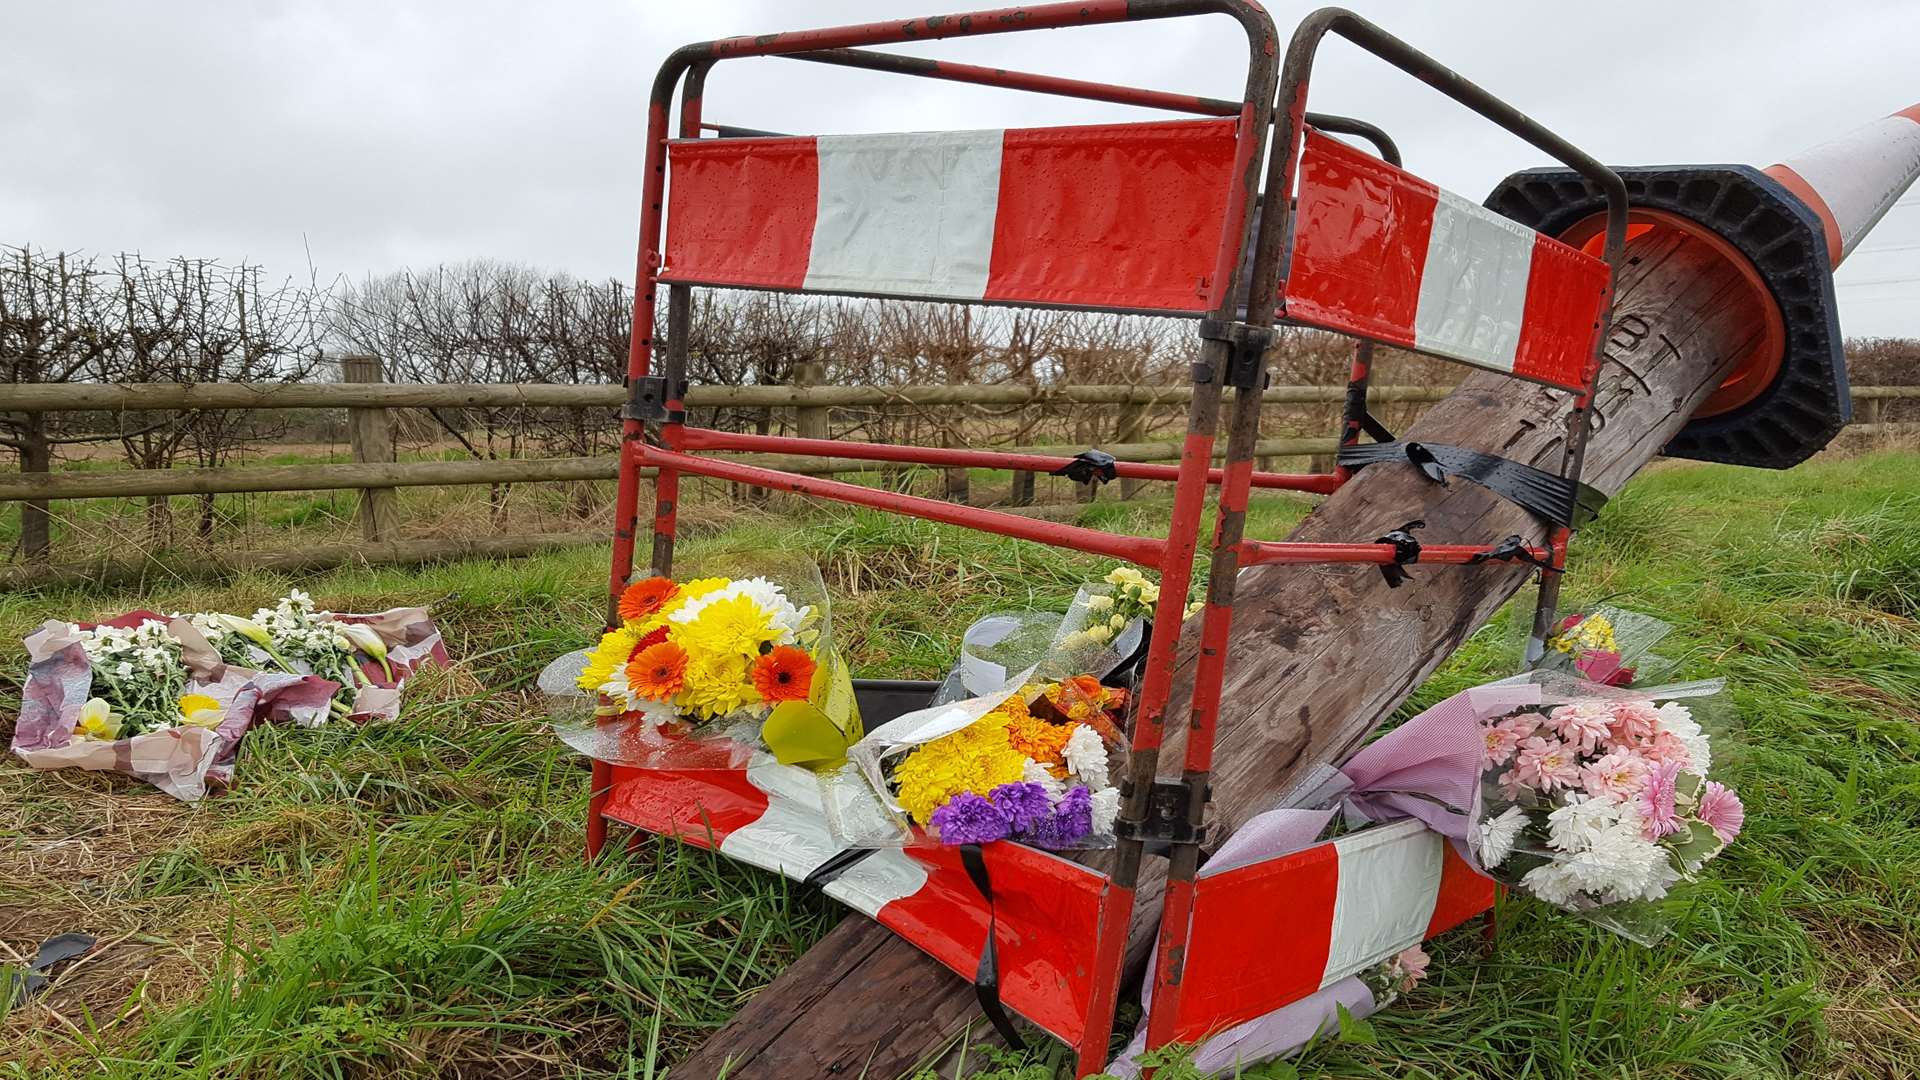 Floral tributes have been left at the site where Leanna died